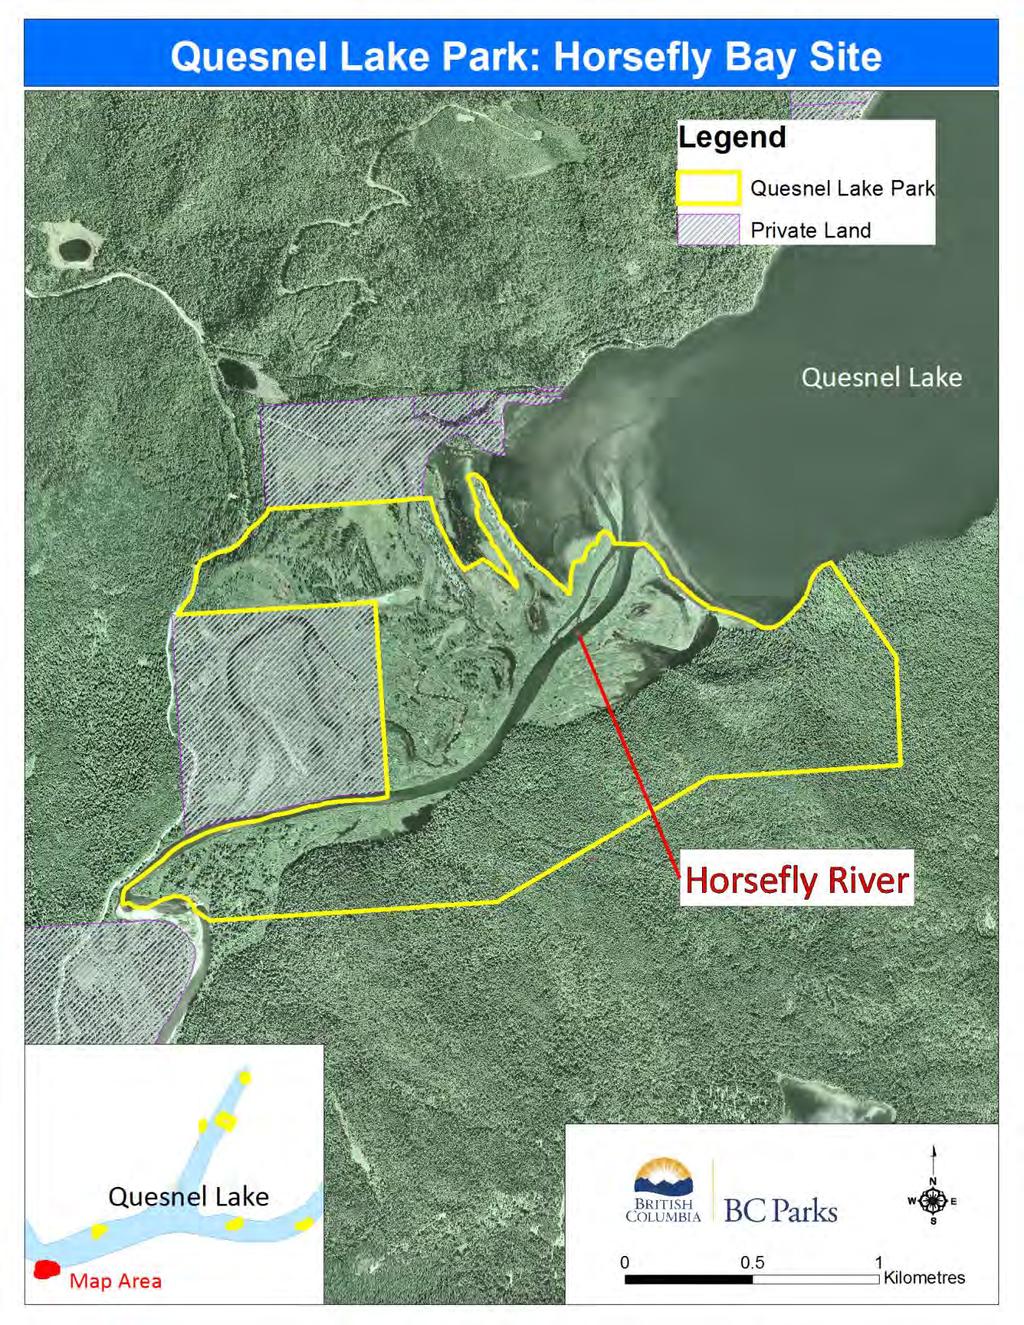 Figure 6: Map of the Horsefly Bay